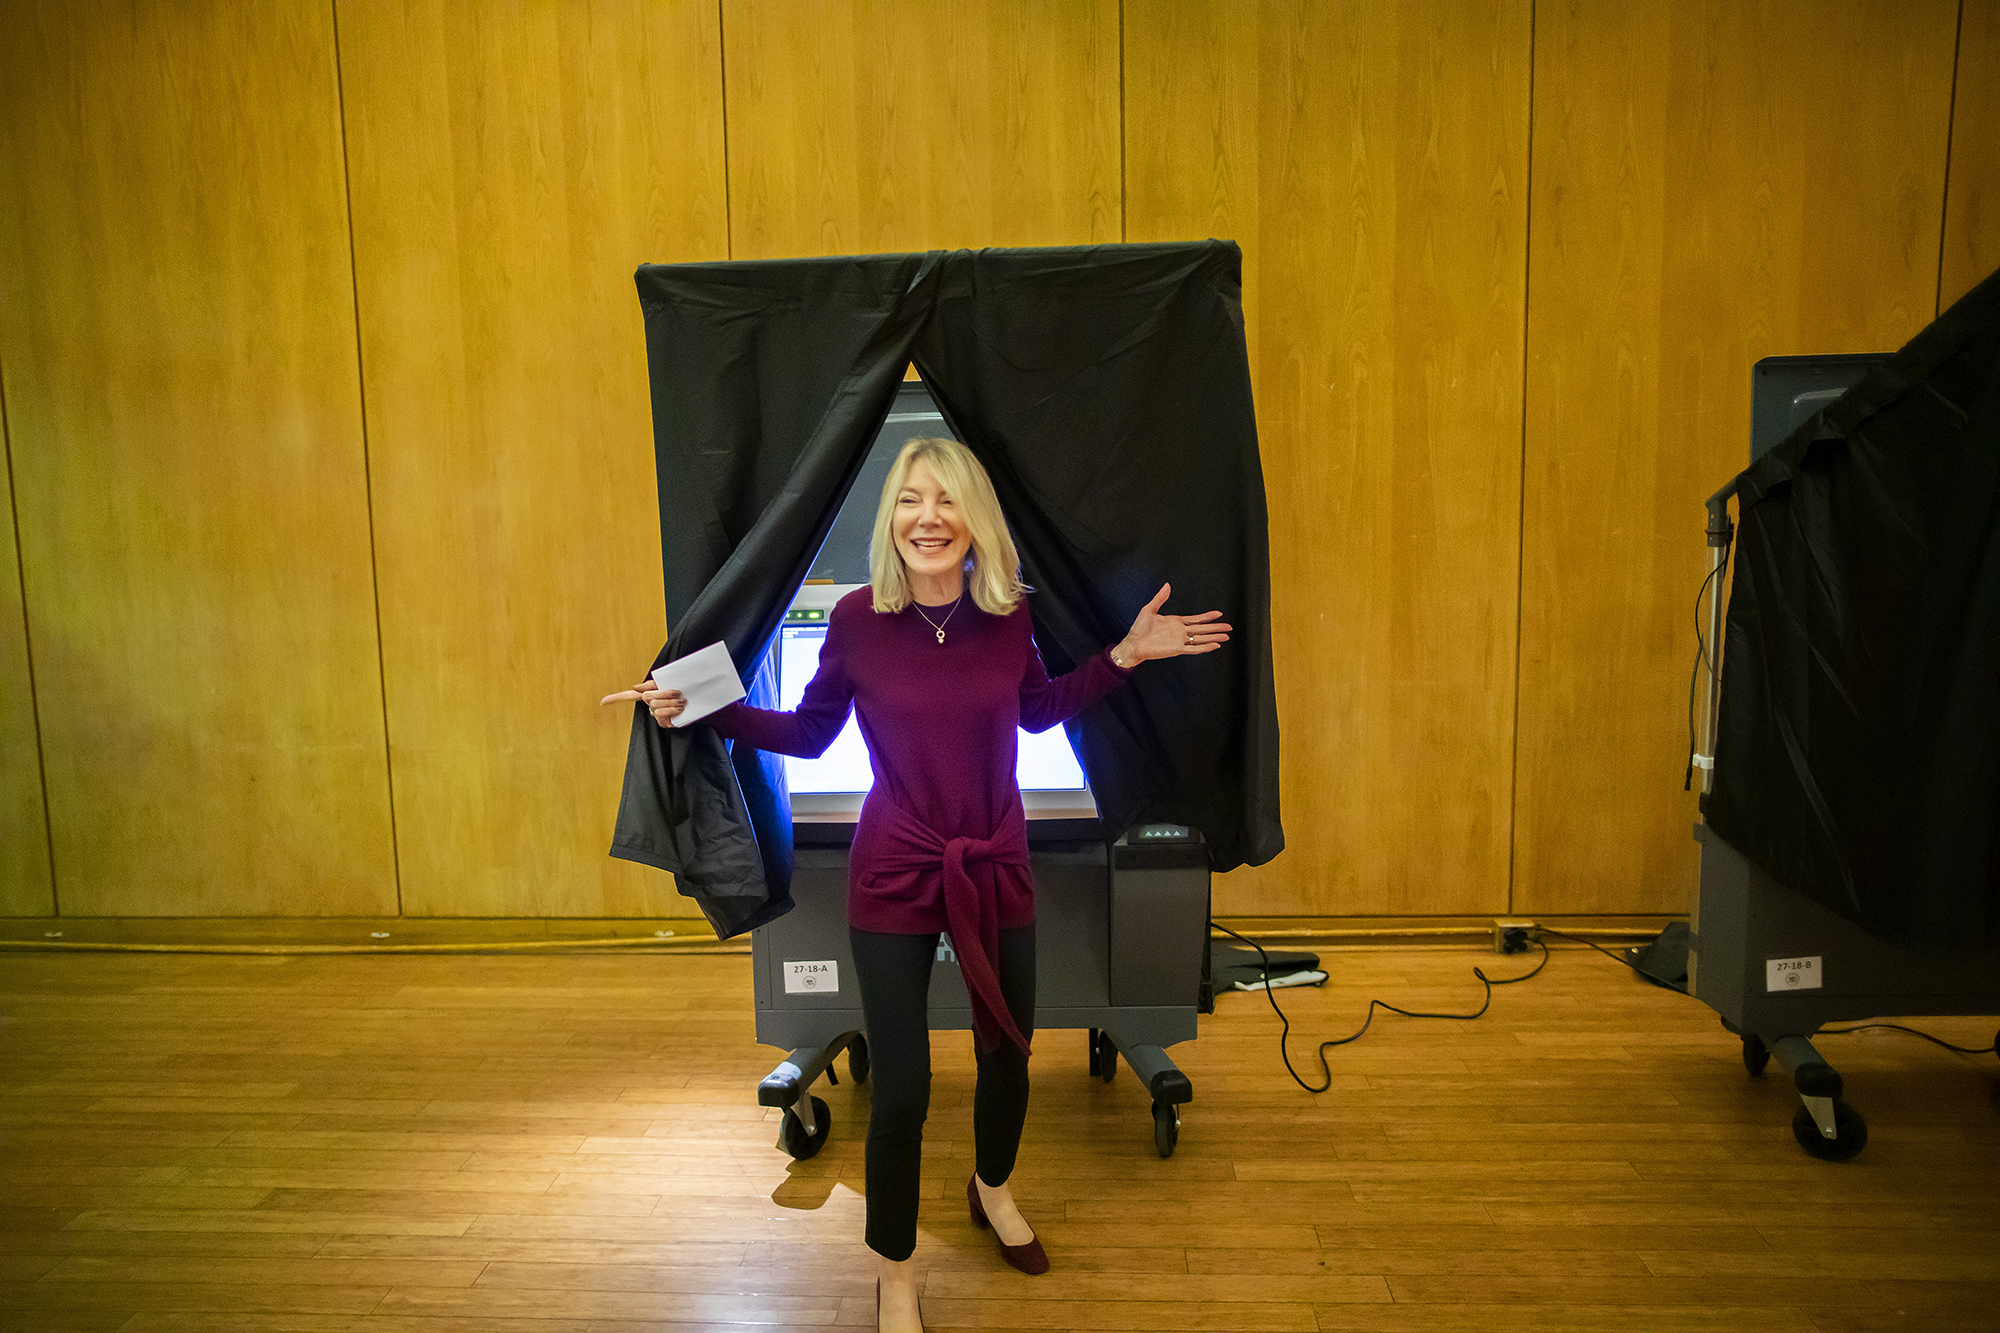 Penn President Amy Gutmann exits the voting booth at Vance Hall on Nov. 5 after casting her ballot.